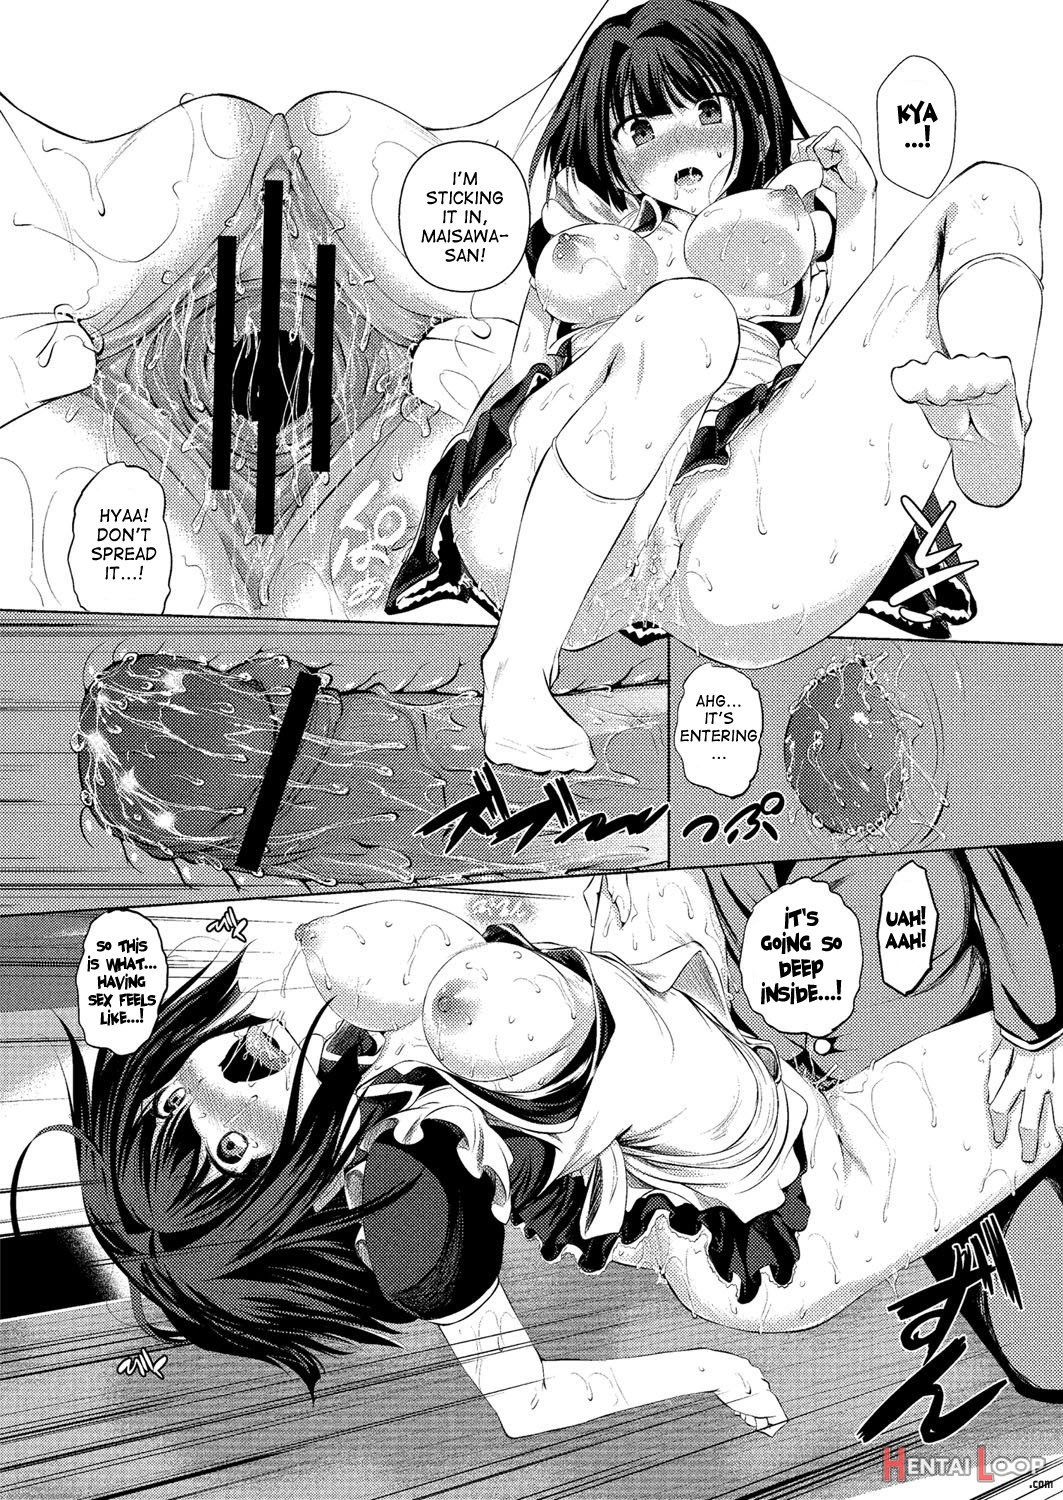 Reserved Maid page 13